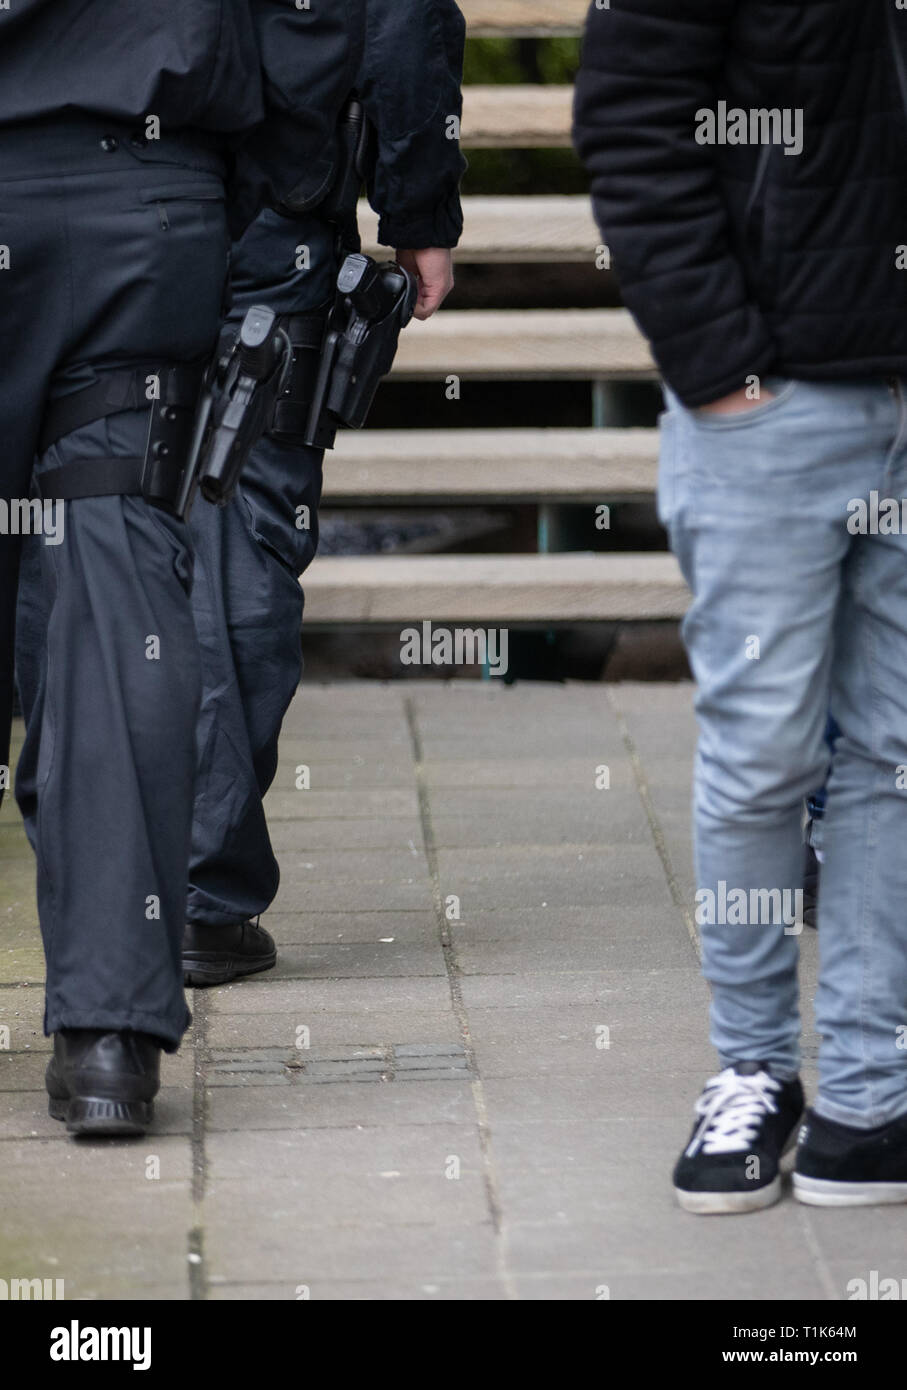 Bielefeld, Germany. 27th Mar, 2019. Policemen carry guns in front of the district court. A trial against eight men on suspicion of a serious breach of the peace begins under great security precautions. The defendants, aged between 20 and 38, are to belong to an extended family. After an argument, one of the men was expelled from a discotheque. The 27-year-old is said to have called his brother and other relatives to it. The argument escalated. Credit: Friso Gentsch/dpa/Alamy Live News Stock Photo